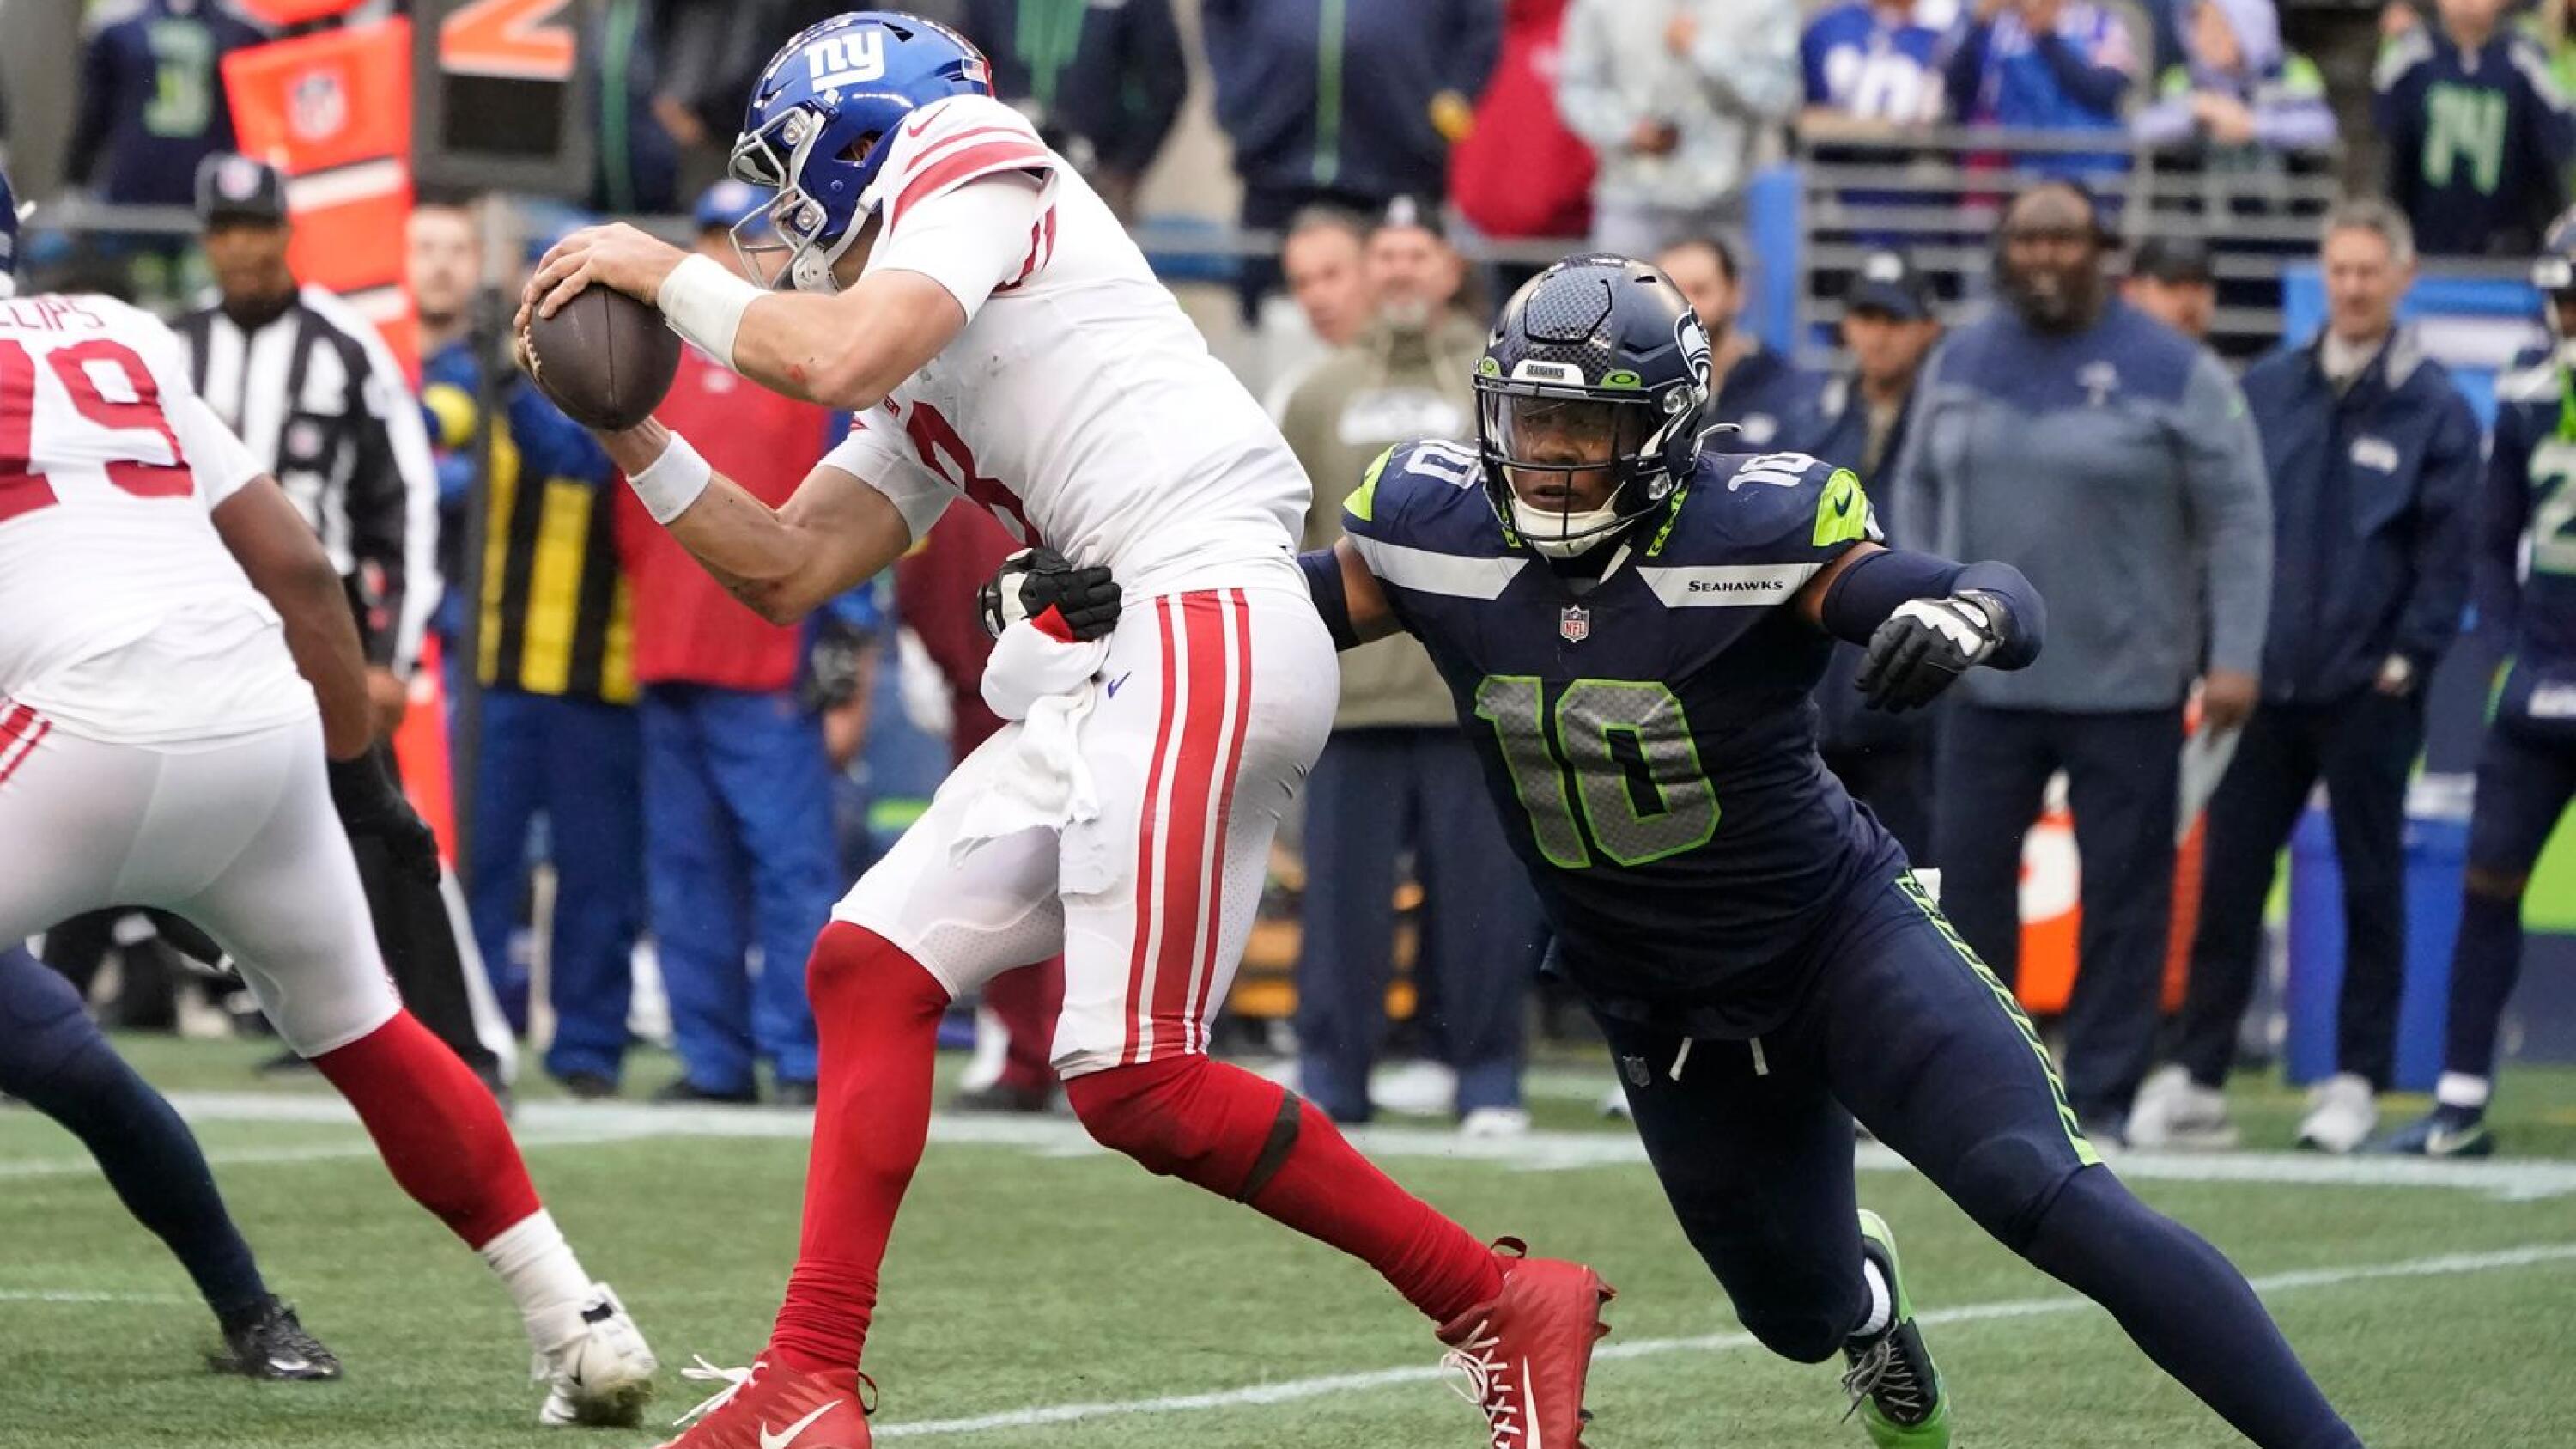 Witherspoon scores on 97-yard pick six, Seahawks beat Giants